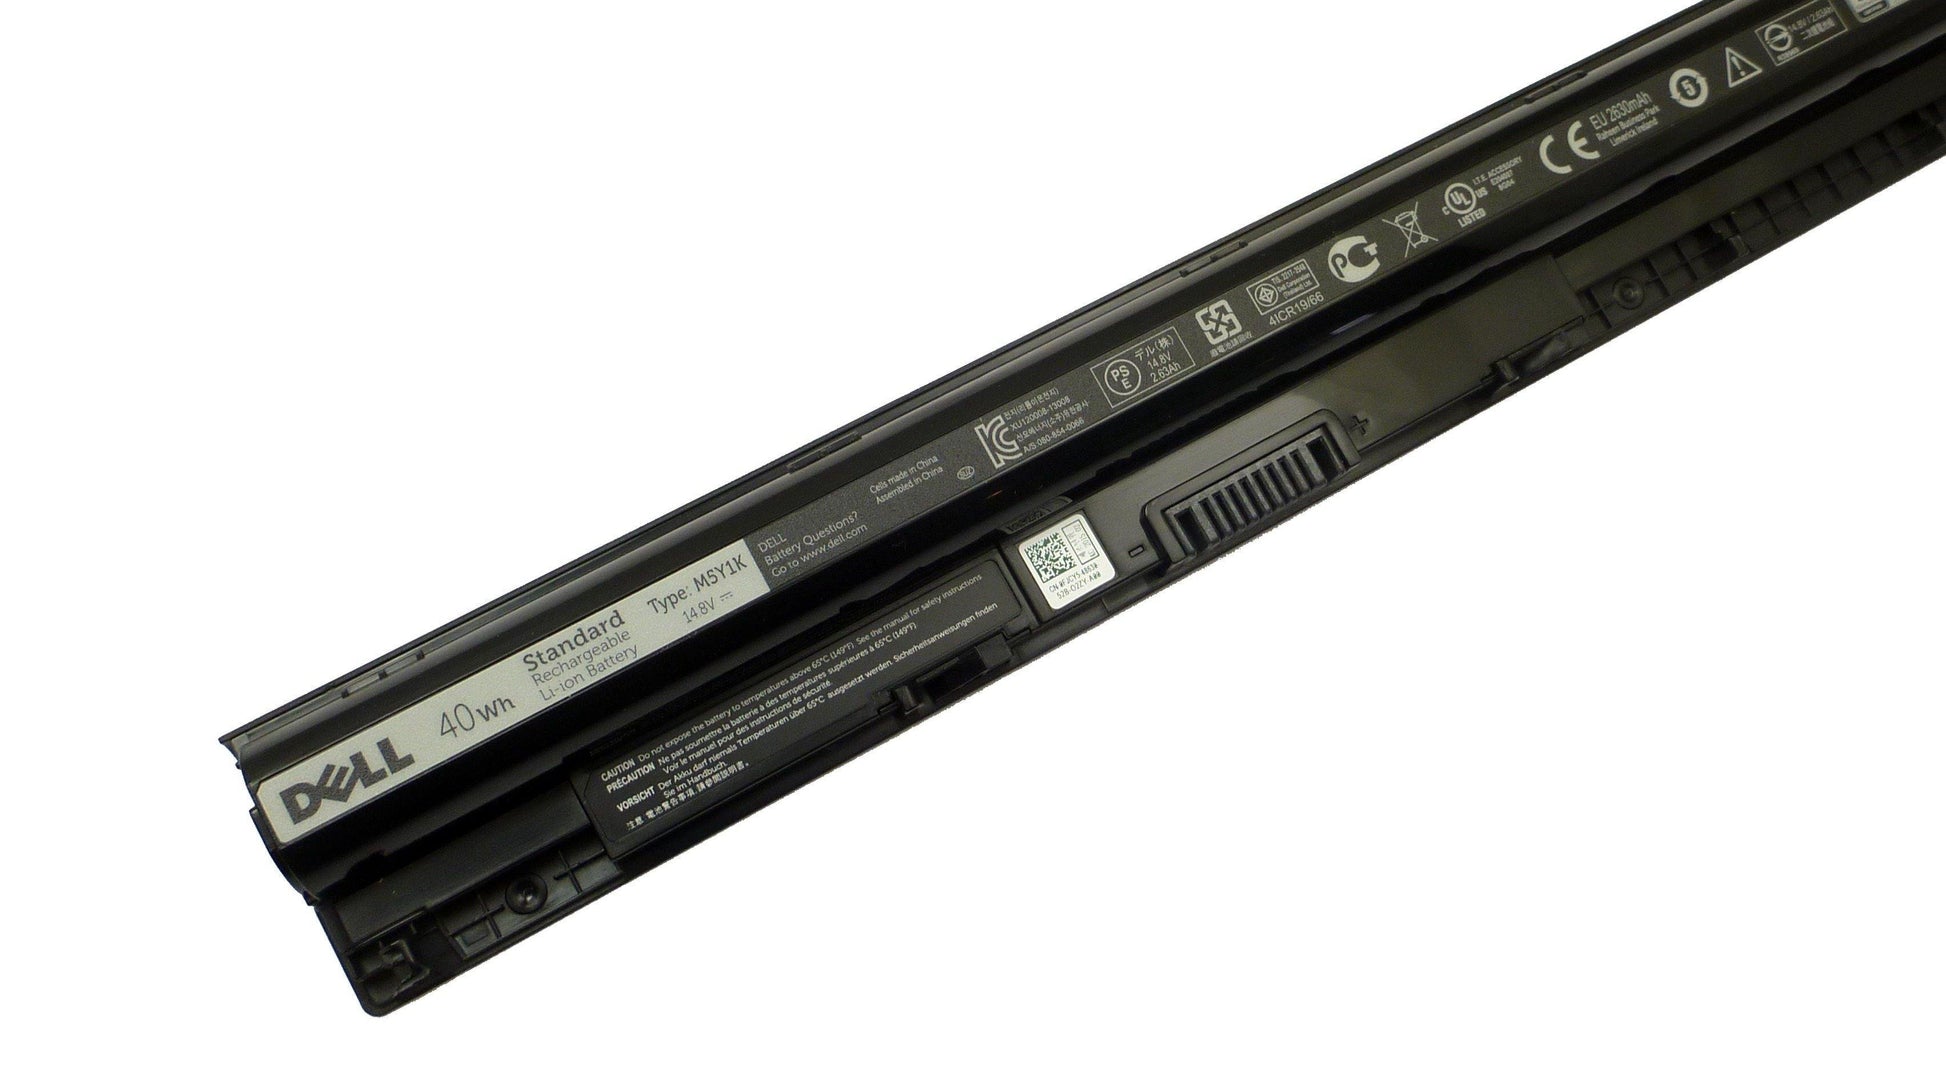 Dell 4 cell Inspiron / Latitude Laptop Battery 40Wh Type M5Y1K, VN3N0, GR437 | Black Cat PC